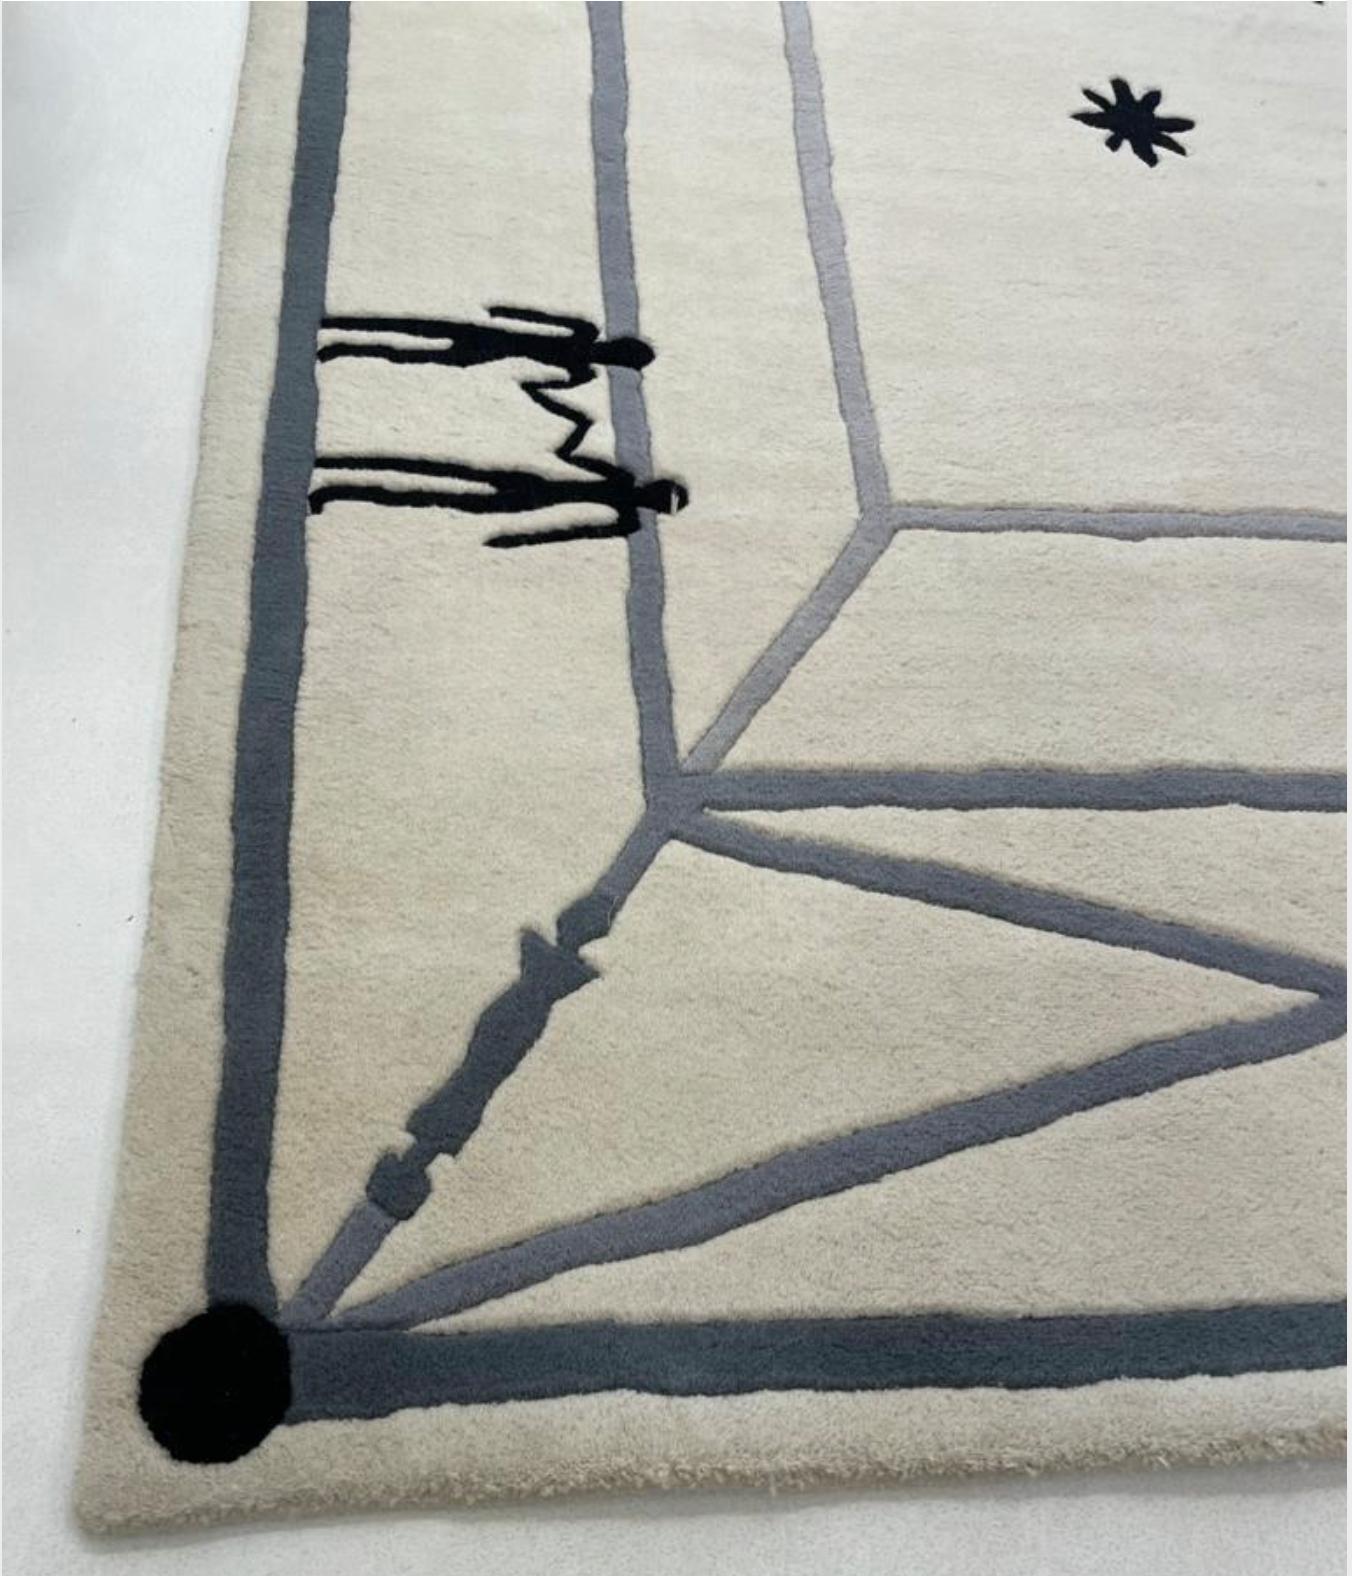 La Rencontre, Rug, Diego Giacometti, 1980's, Hand-woven, Design, Interior
Ed. 100 pcs
1984
Hand-woven, stitch and needle, wool and cotton weft
275 x 175 cm
Signature embroidered on the back and registered reference : D.Giacometti / R 84.24.6 R5 ;